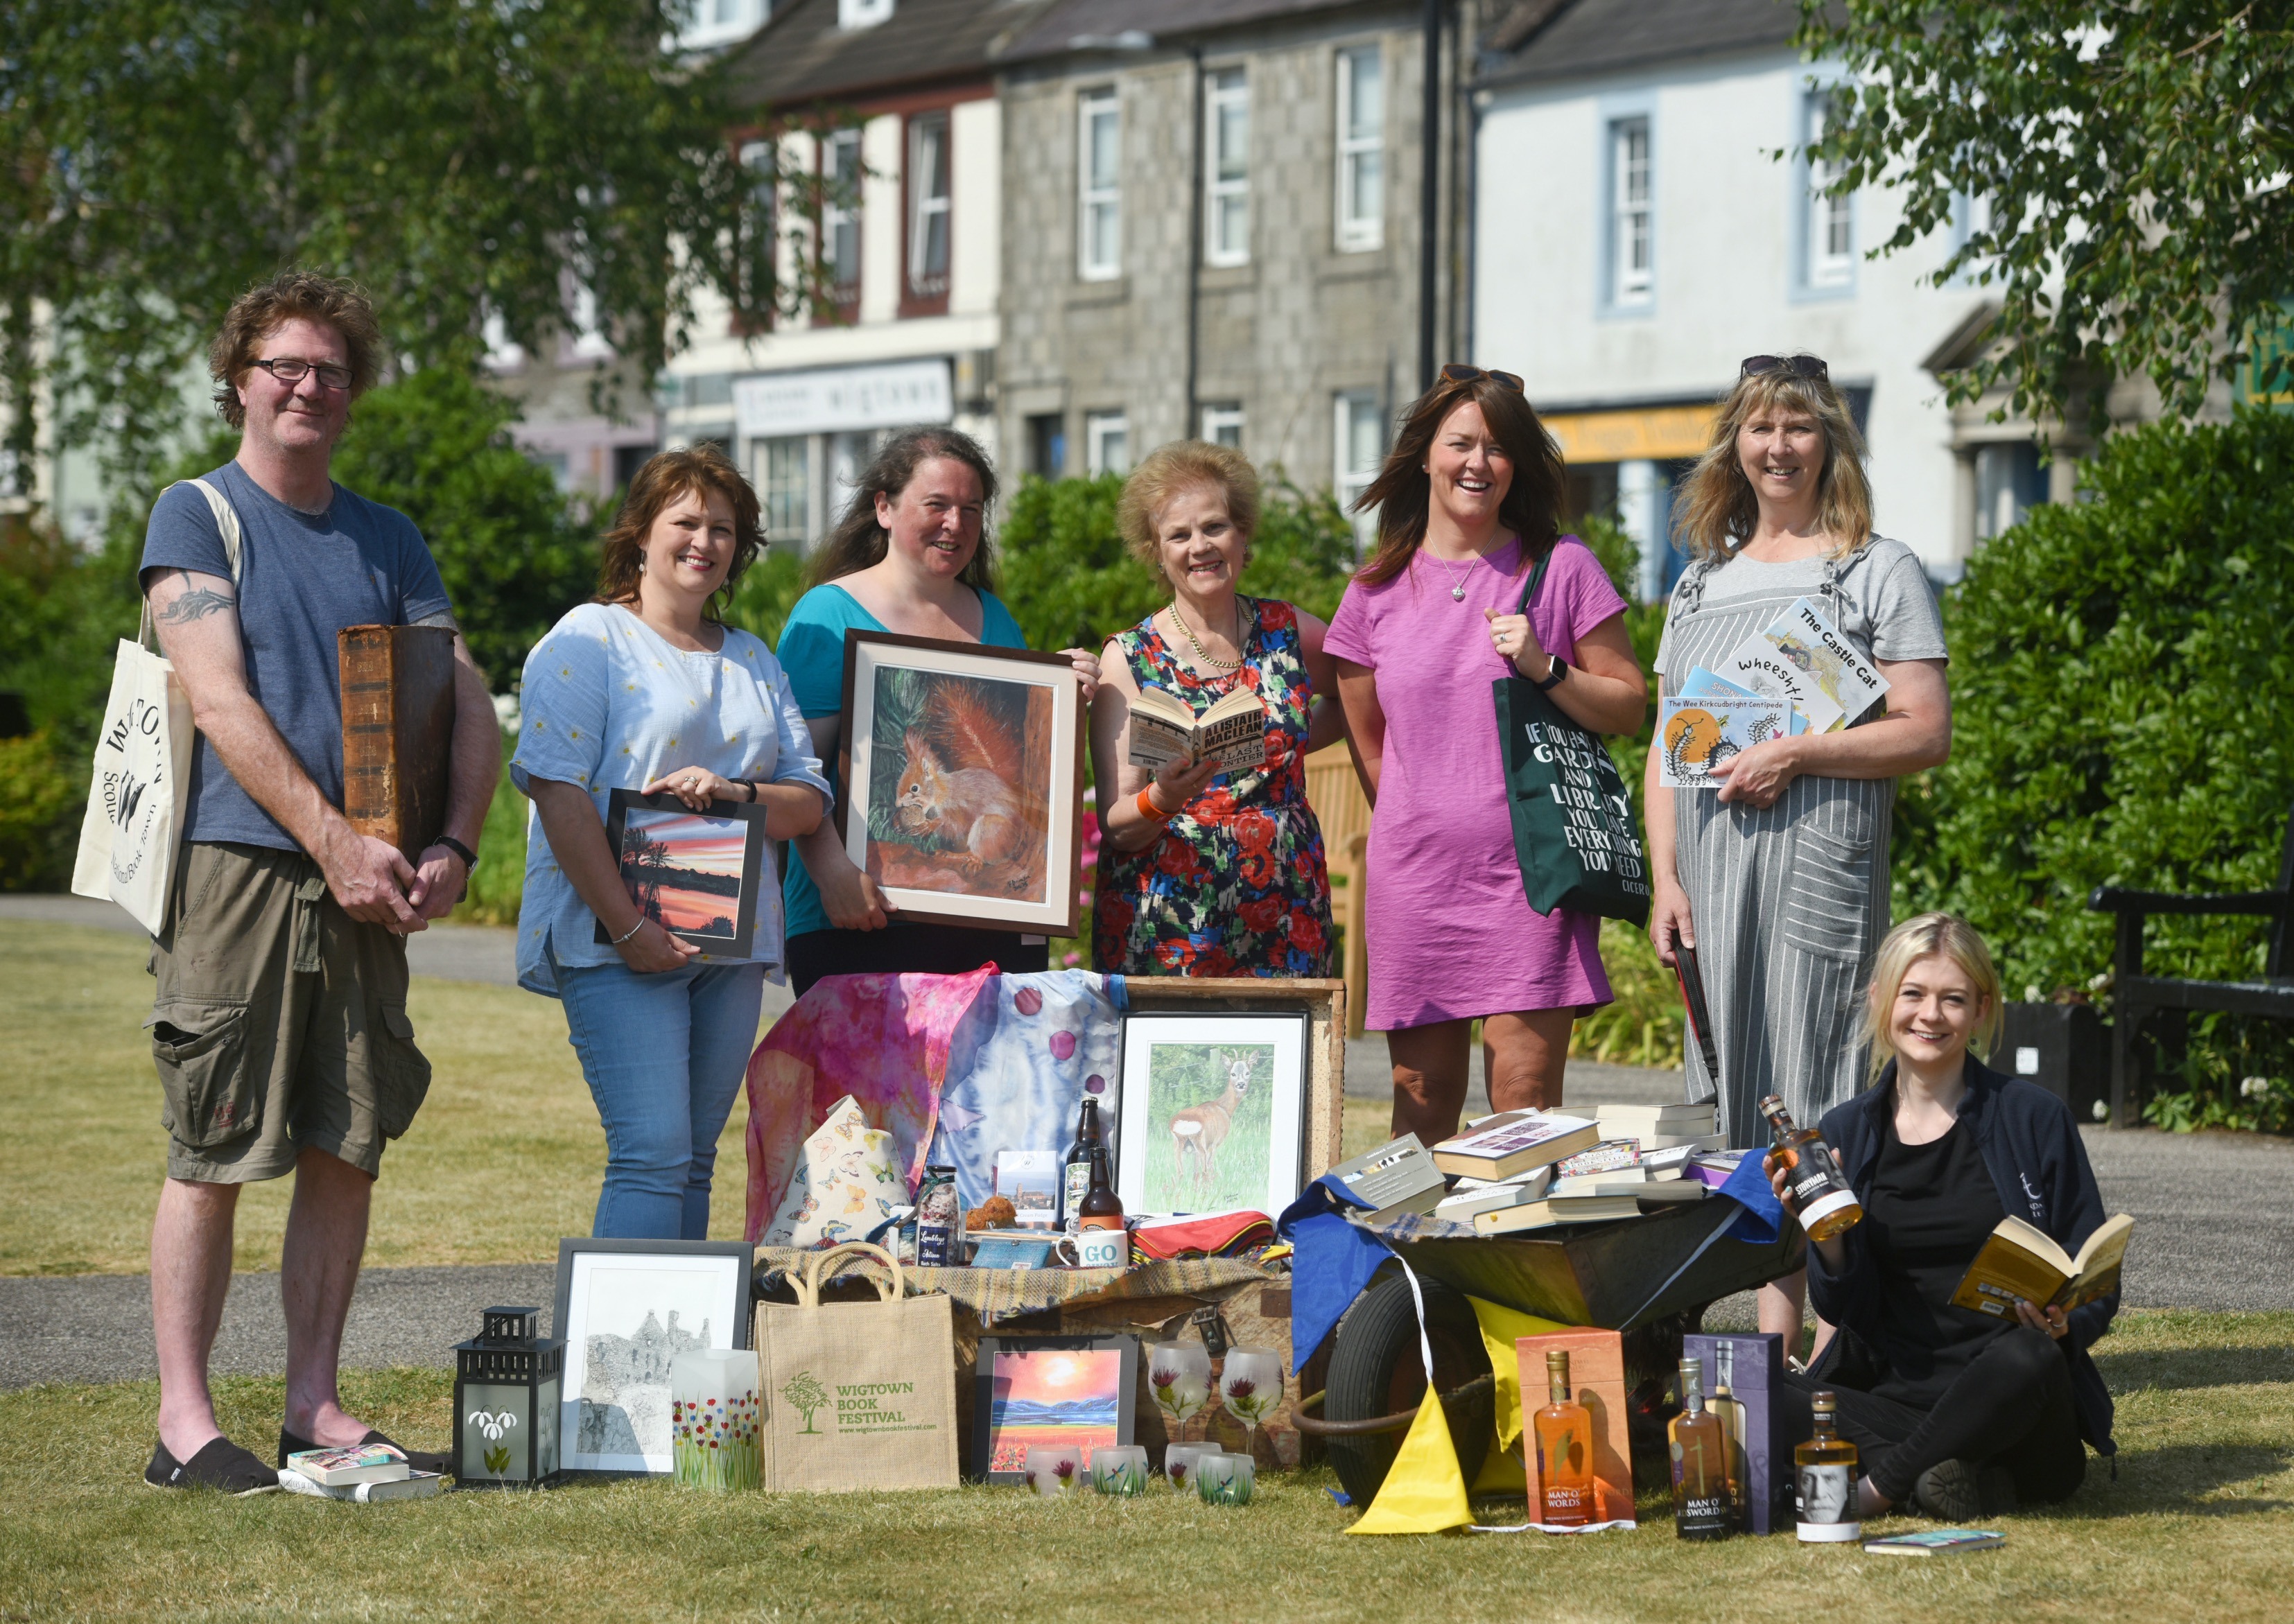 During the Wigtown Book Festival Cathy Agnew, Shaun Bythell and stall holders from The Kist stand together in Wigtown gardens. They are holding books and pictures in front of them are various items.